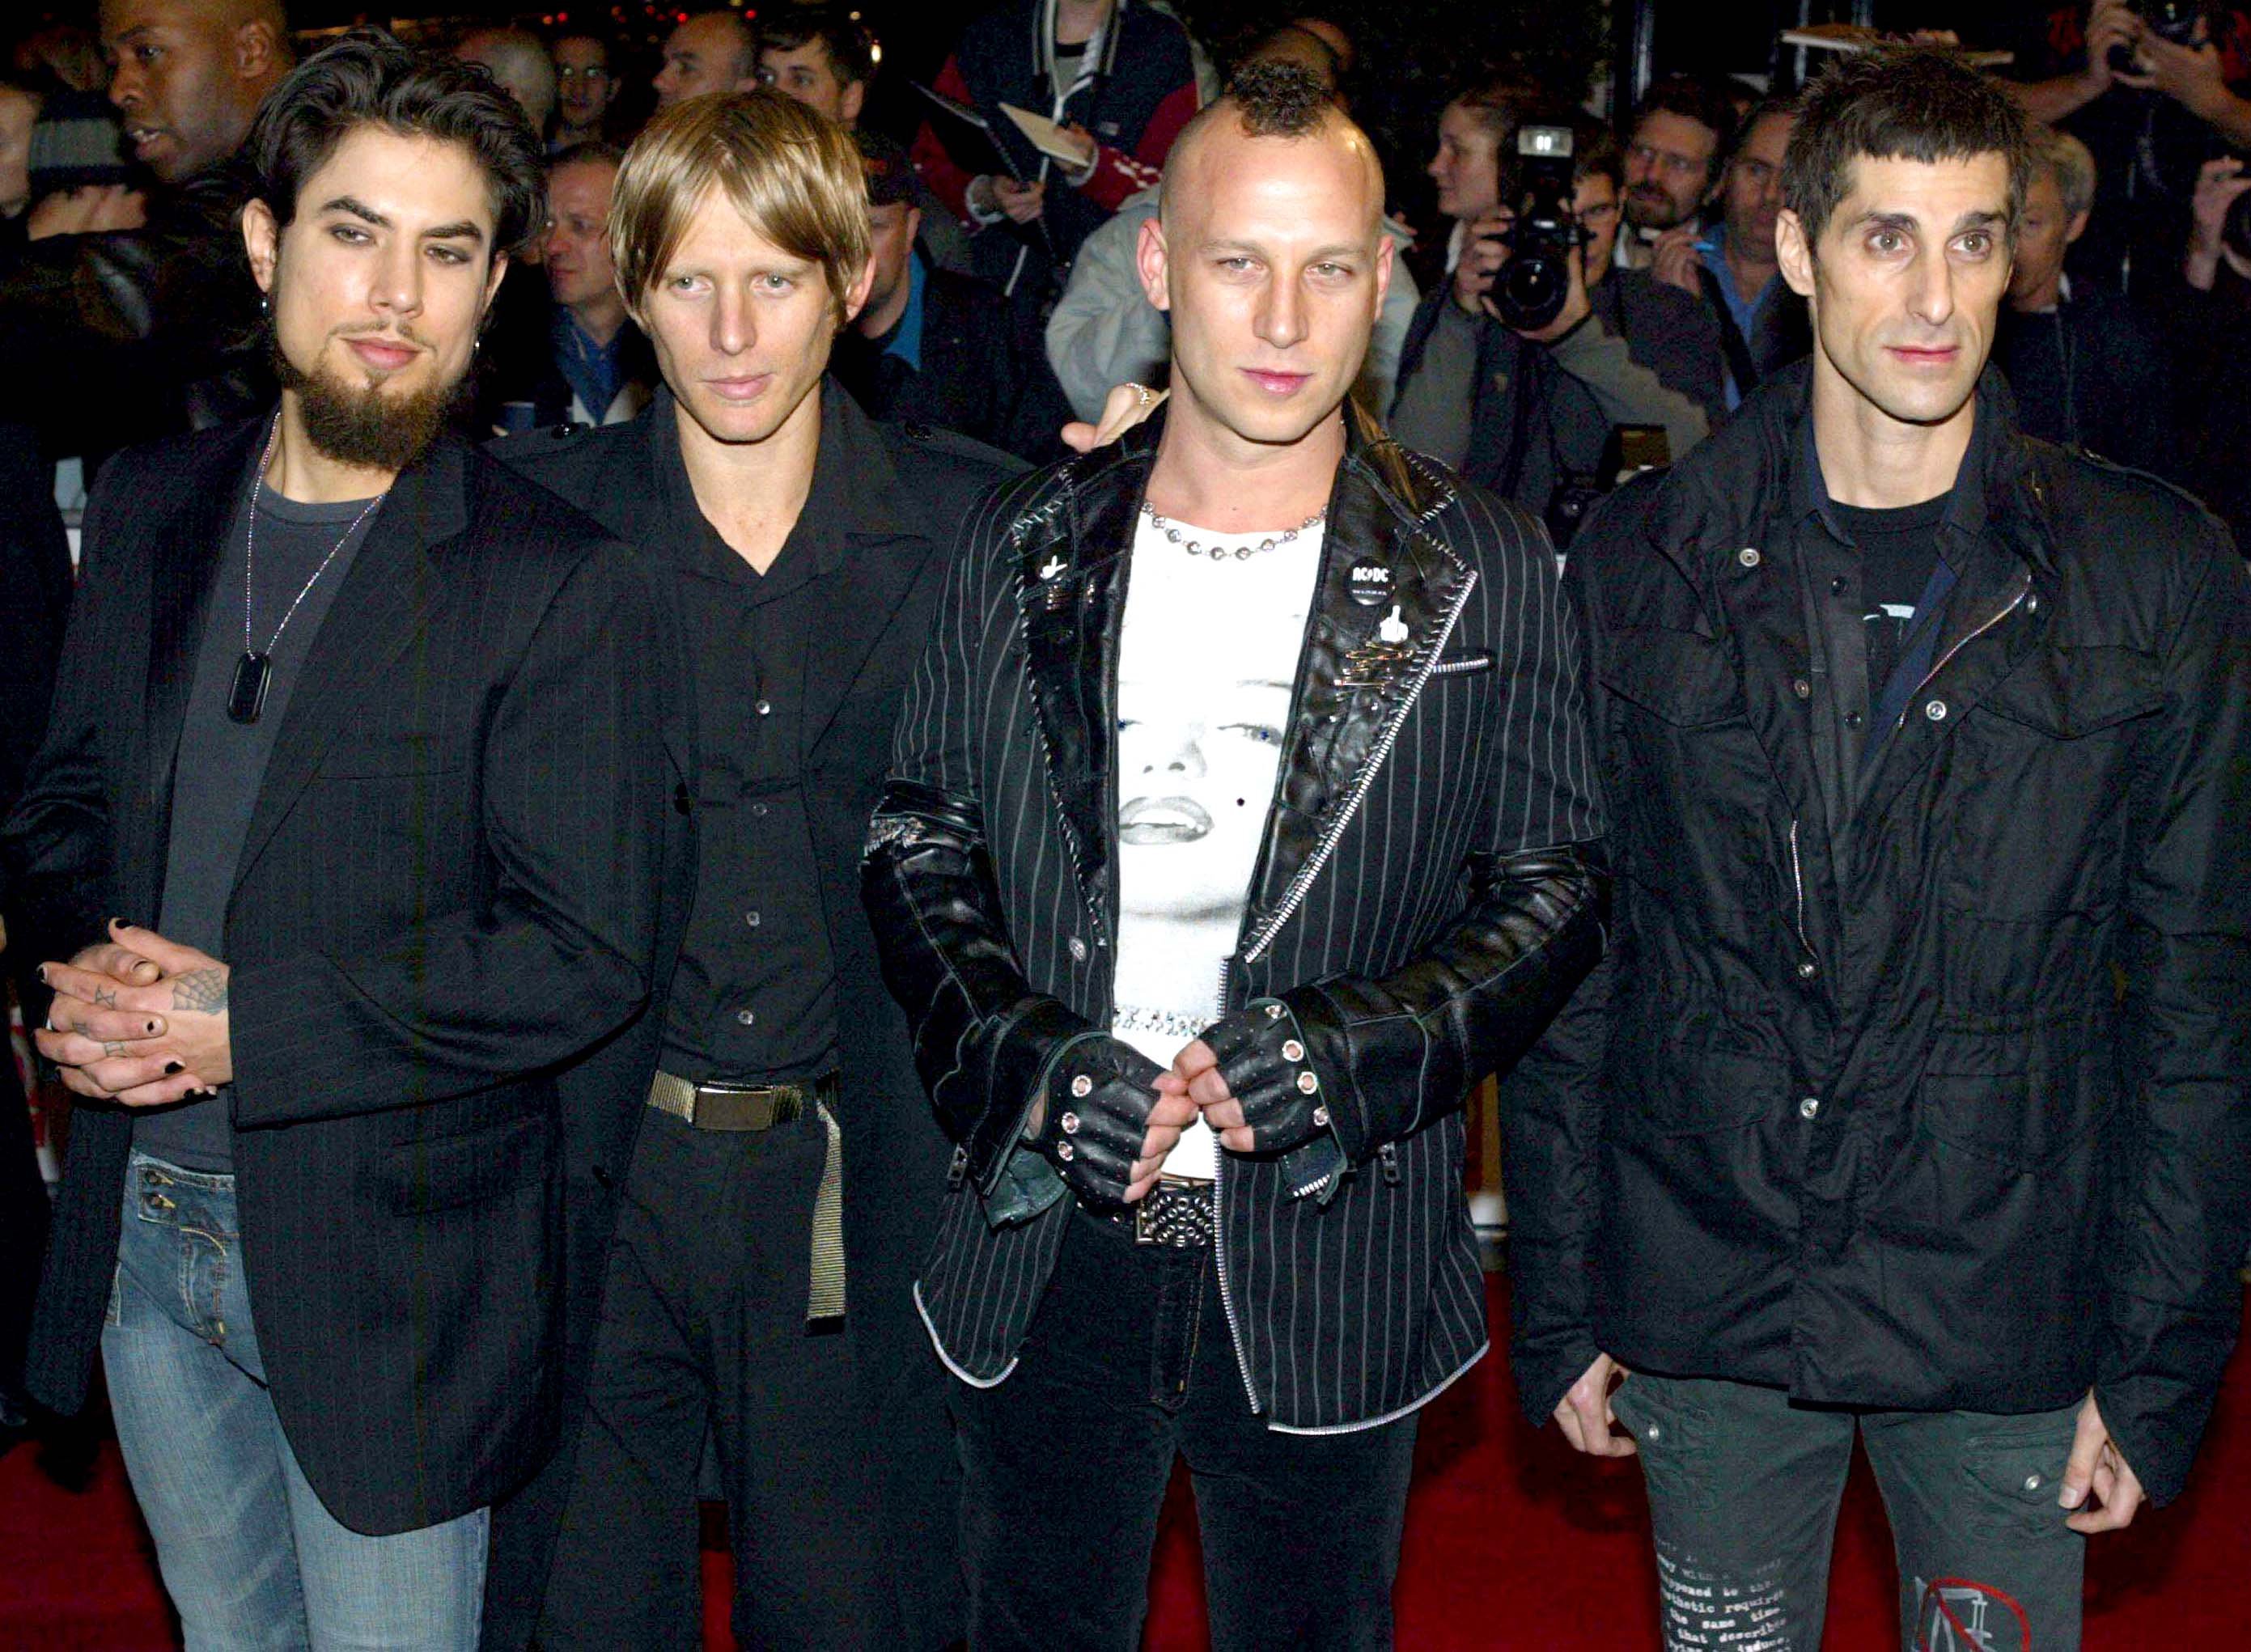 Over the years, Jane's Addiction has split and reunited many times